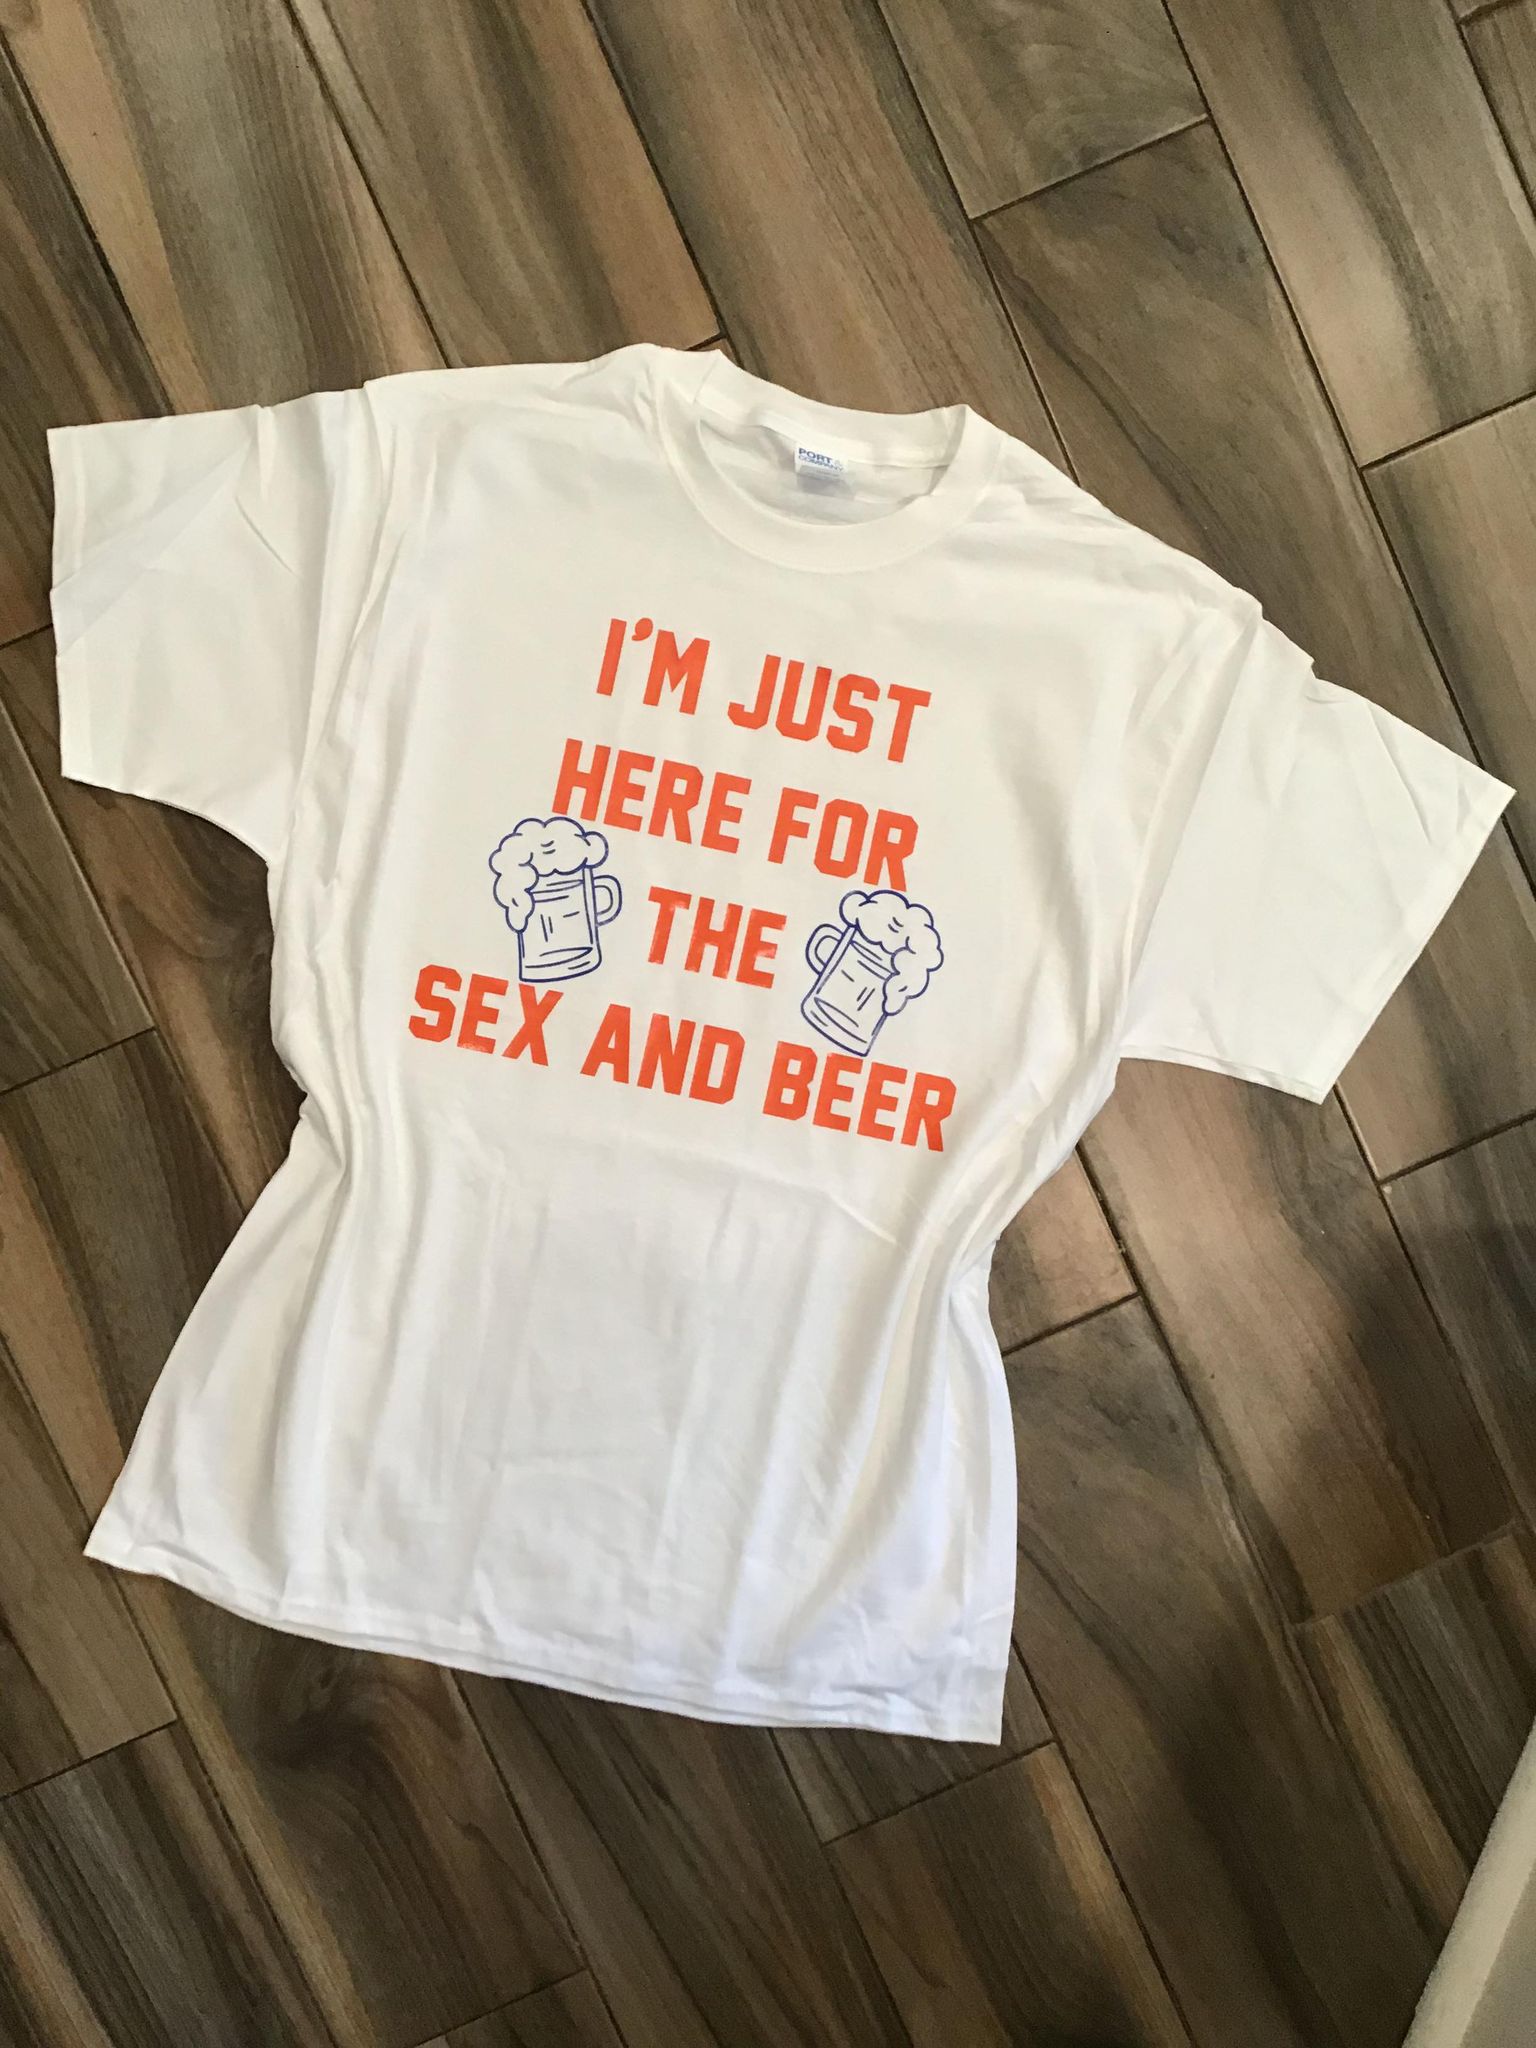 I'm Just Here For the Sex and Beer Shirt